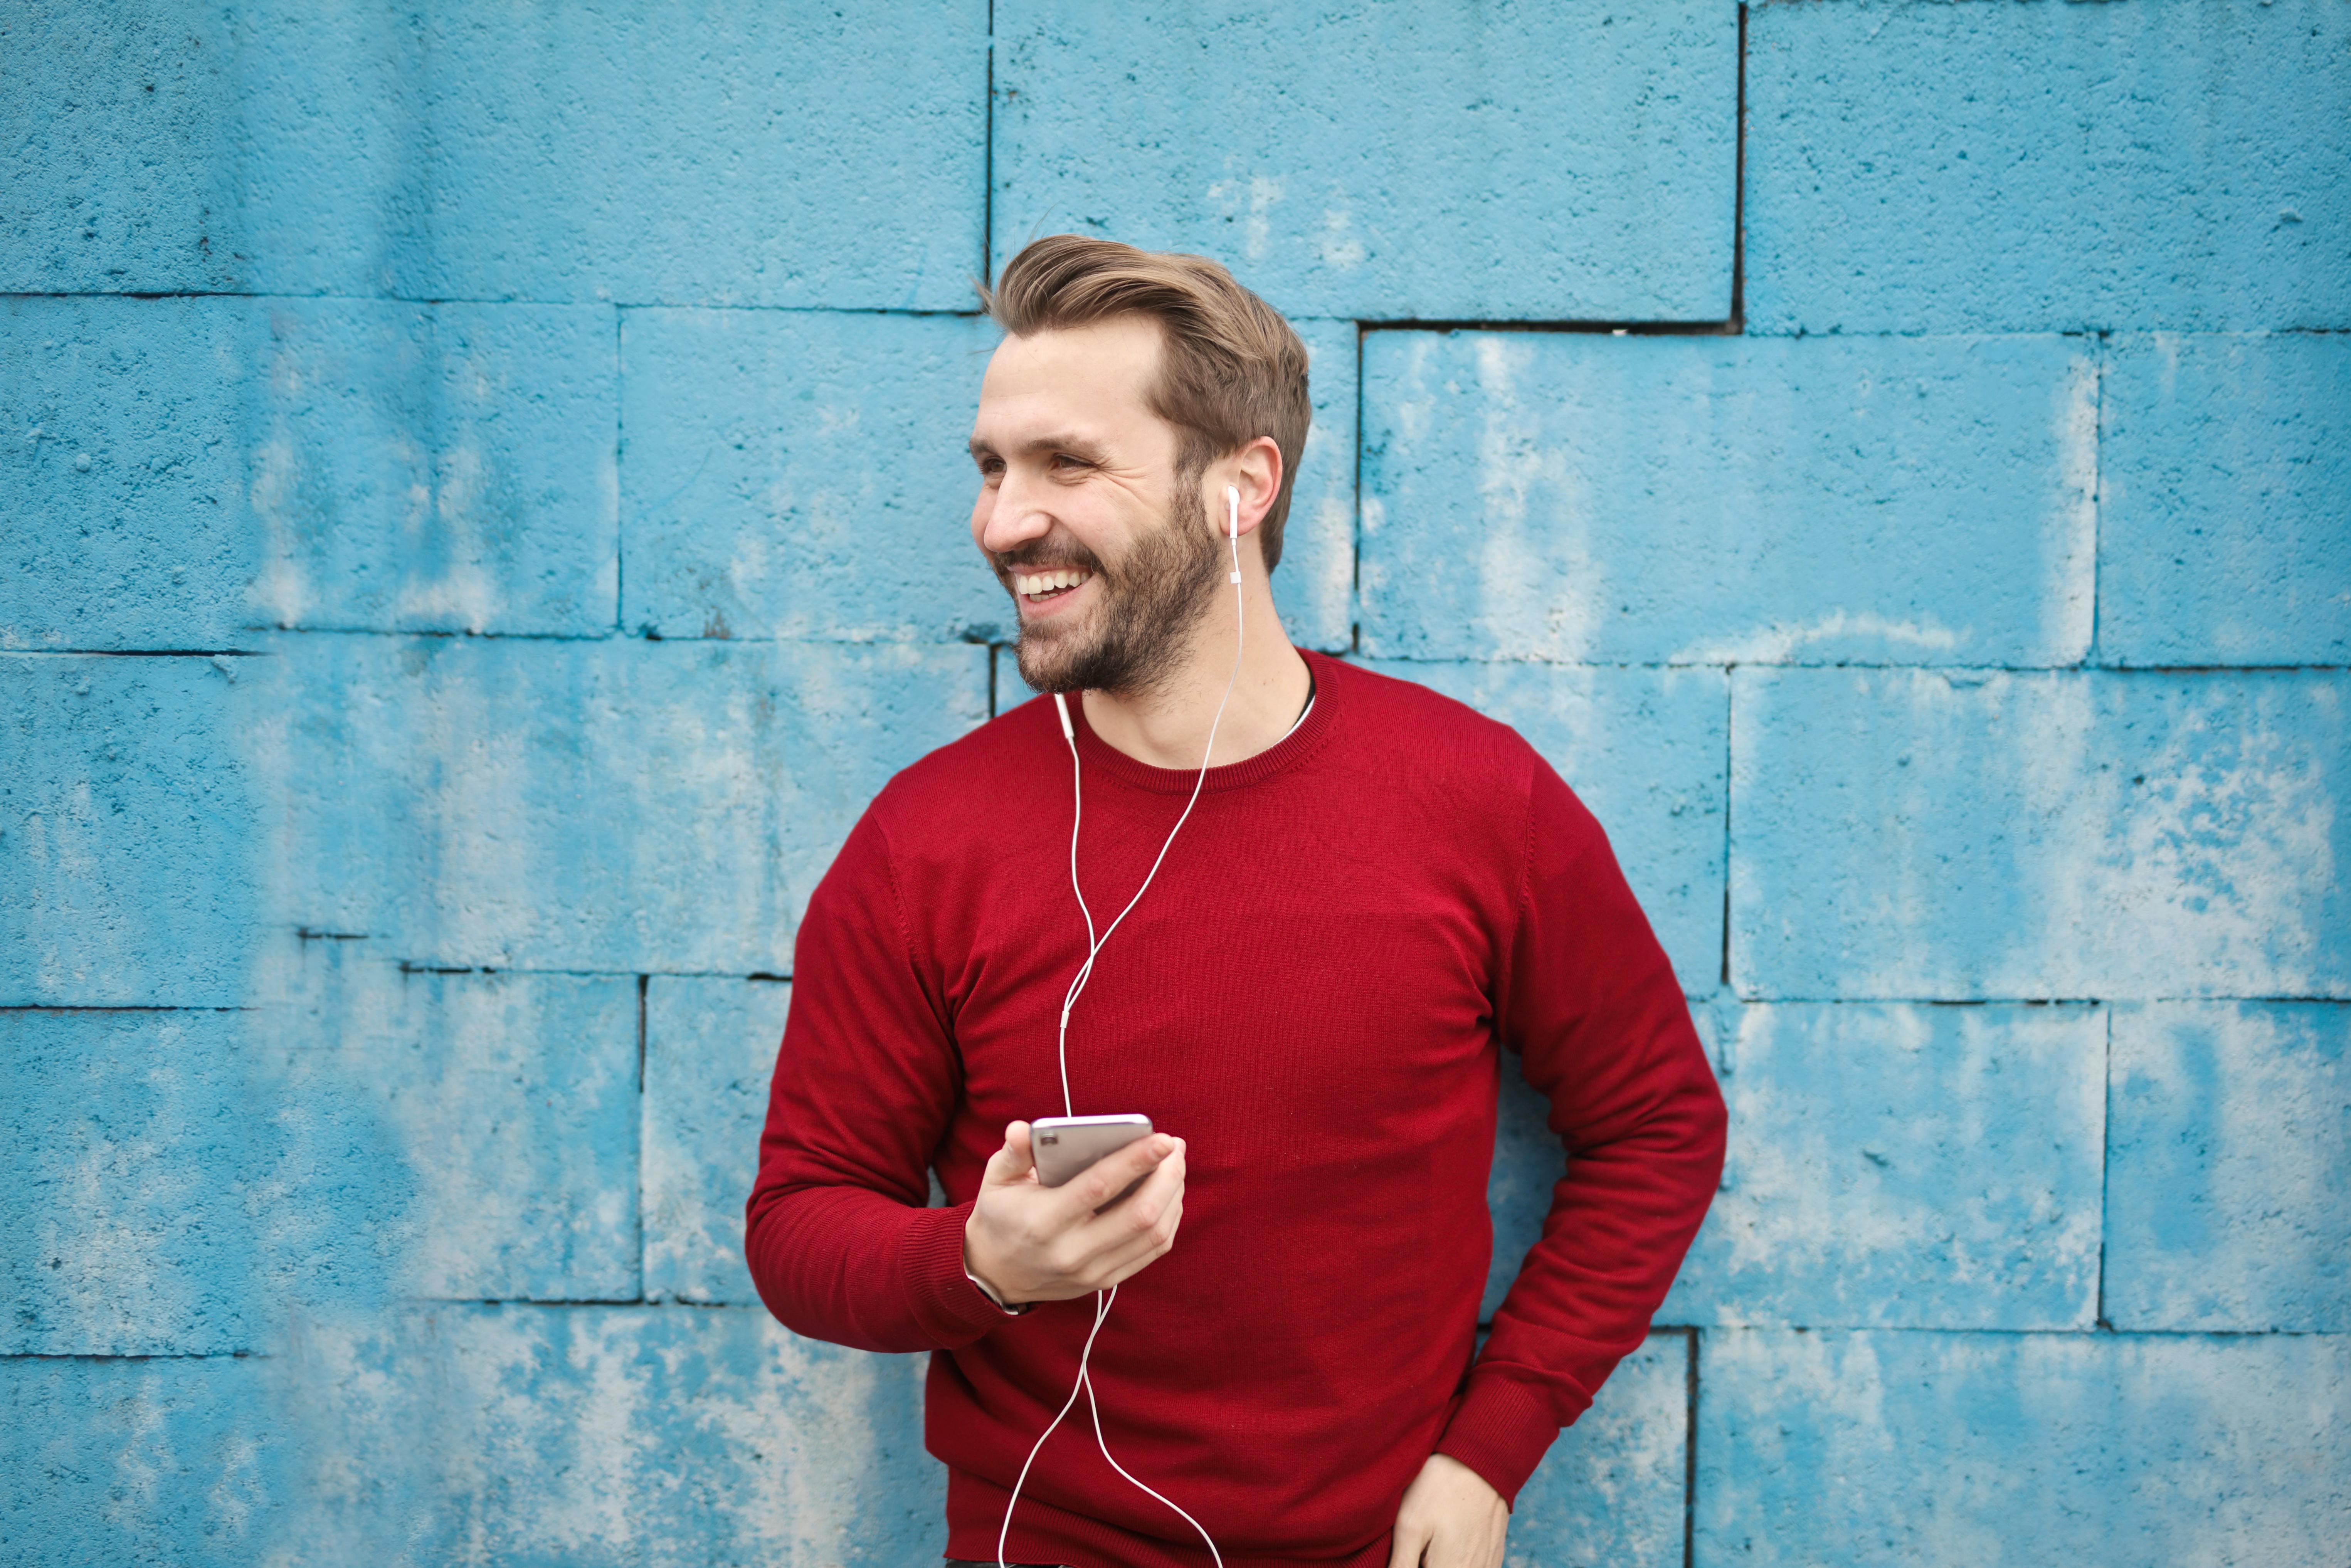 A happy man speaking on his phone through headsets | Source: Pexels